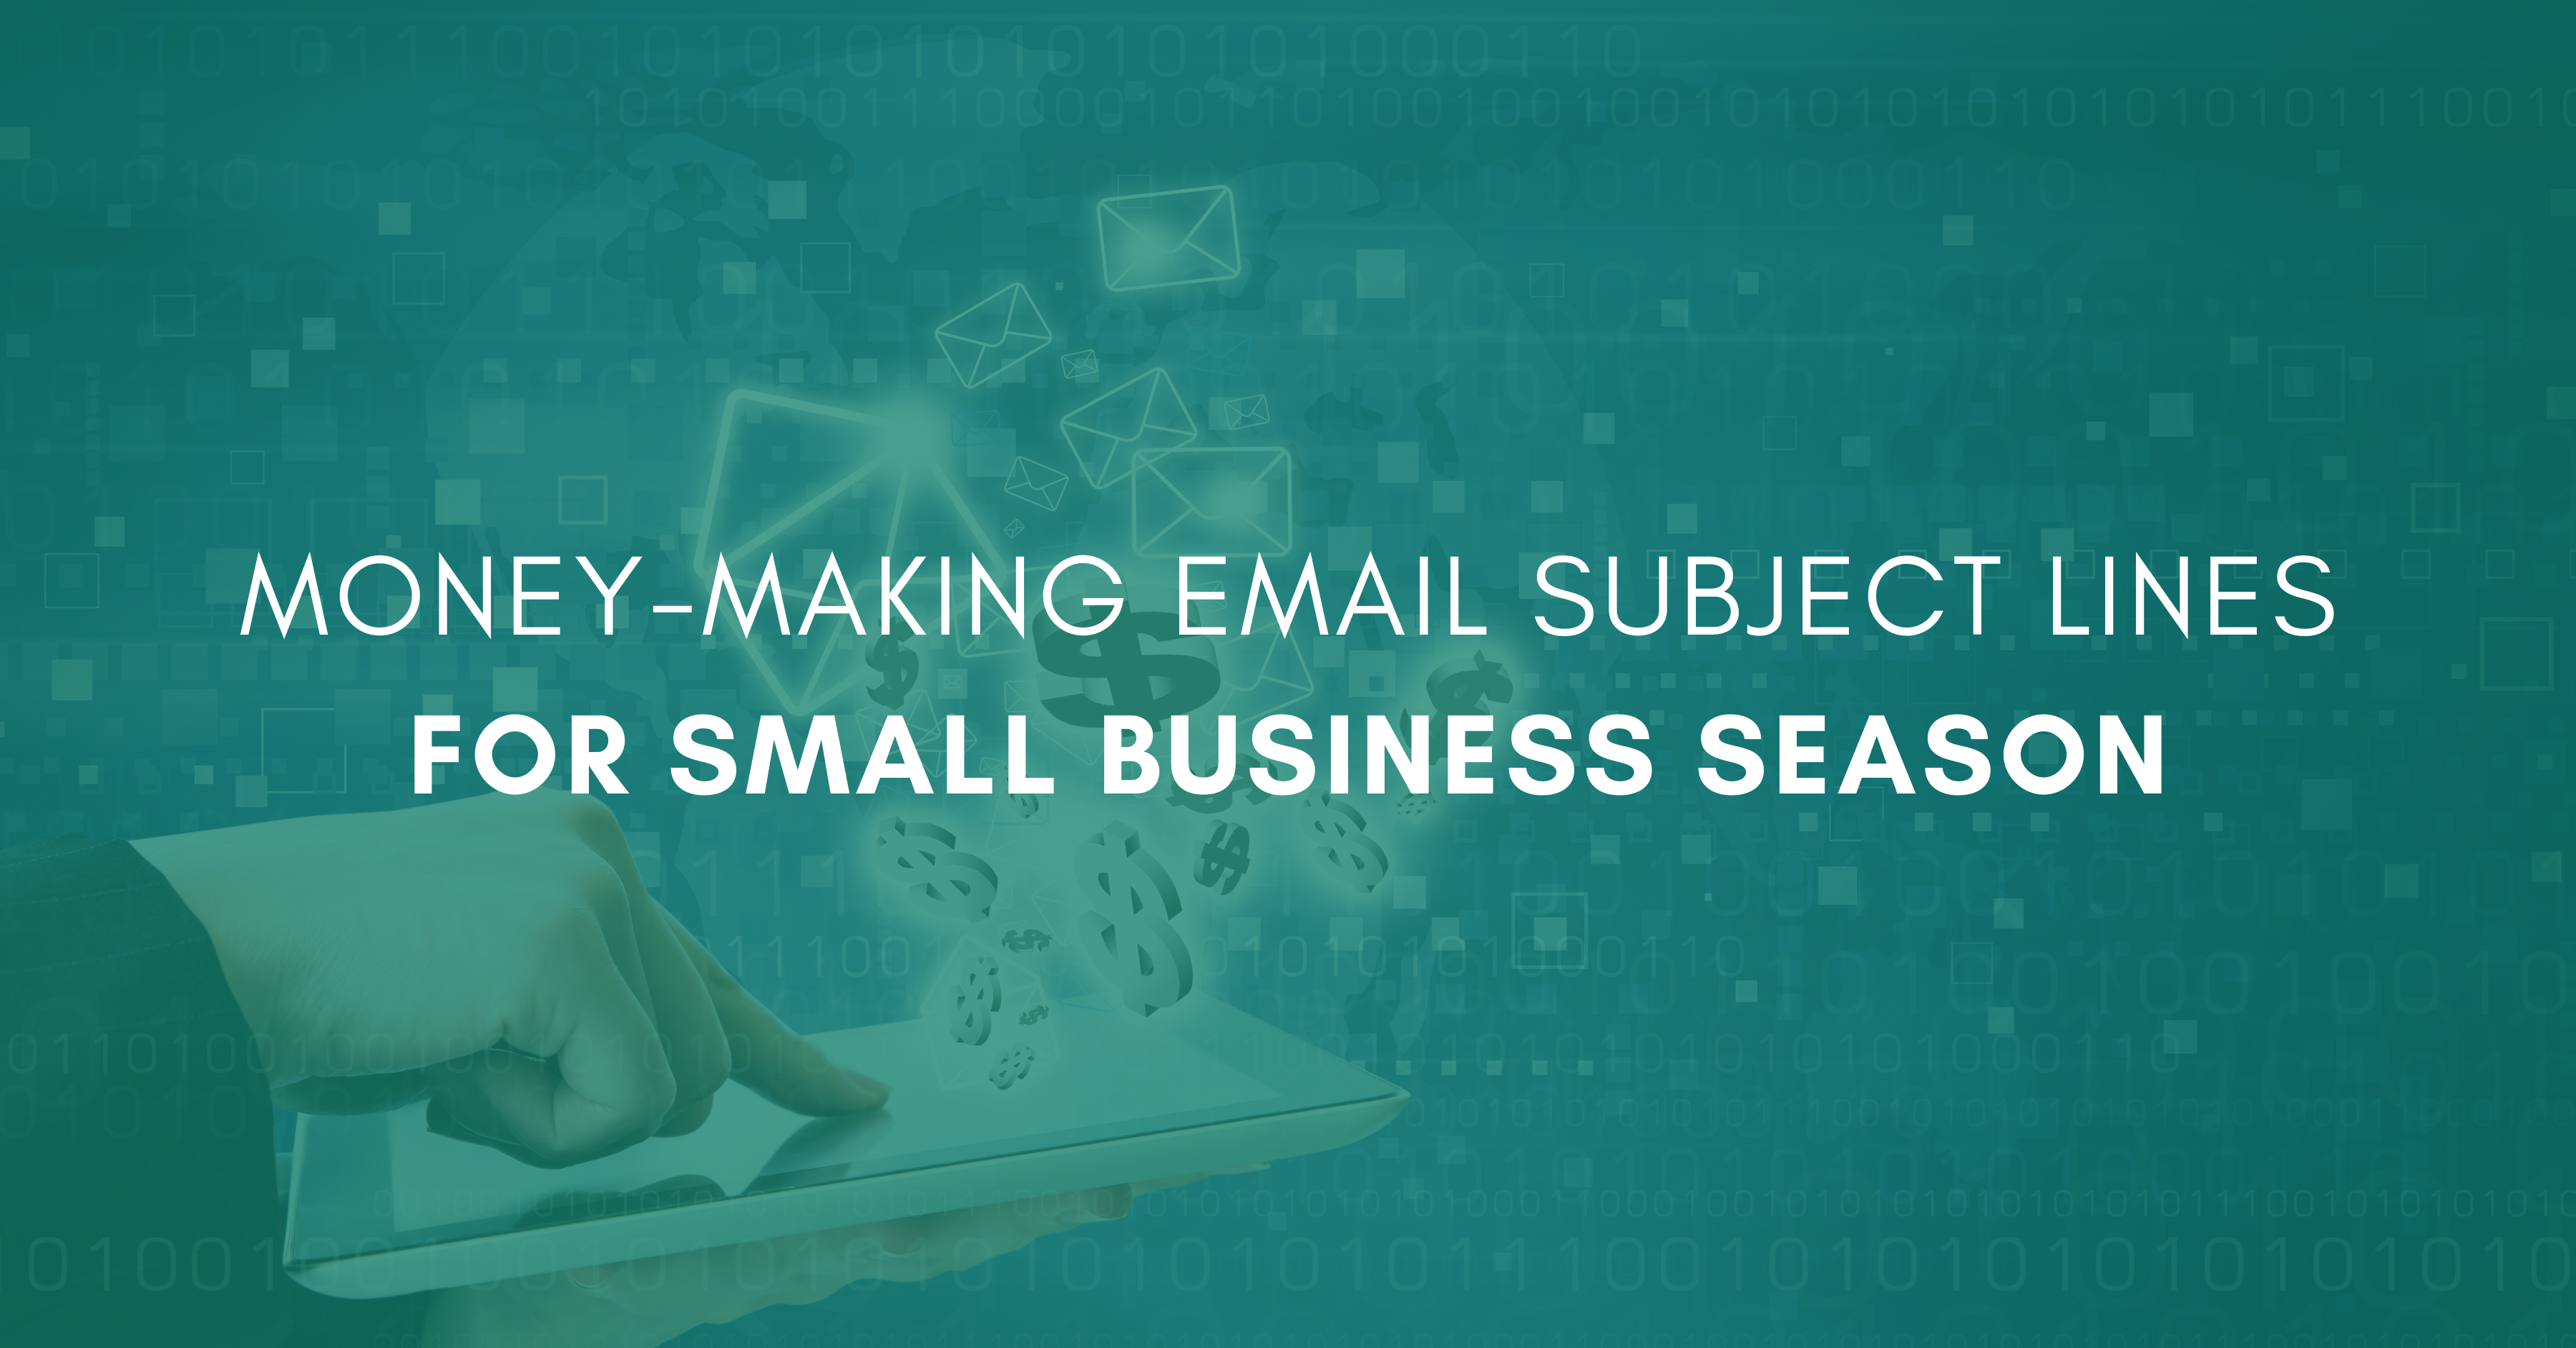 Money-Making Email Subject Lines for Small Business Season